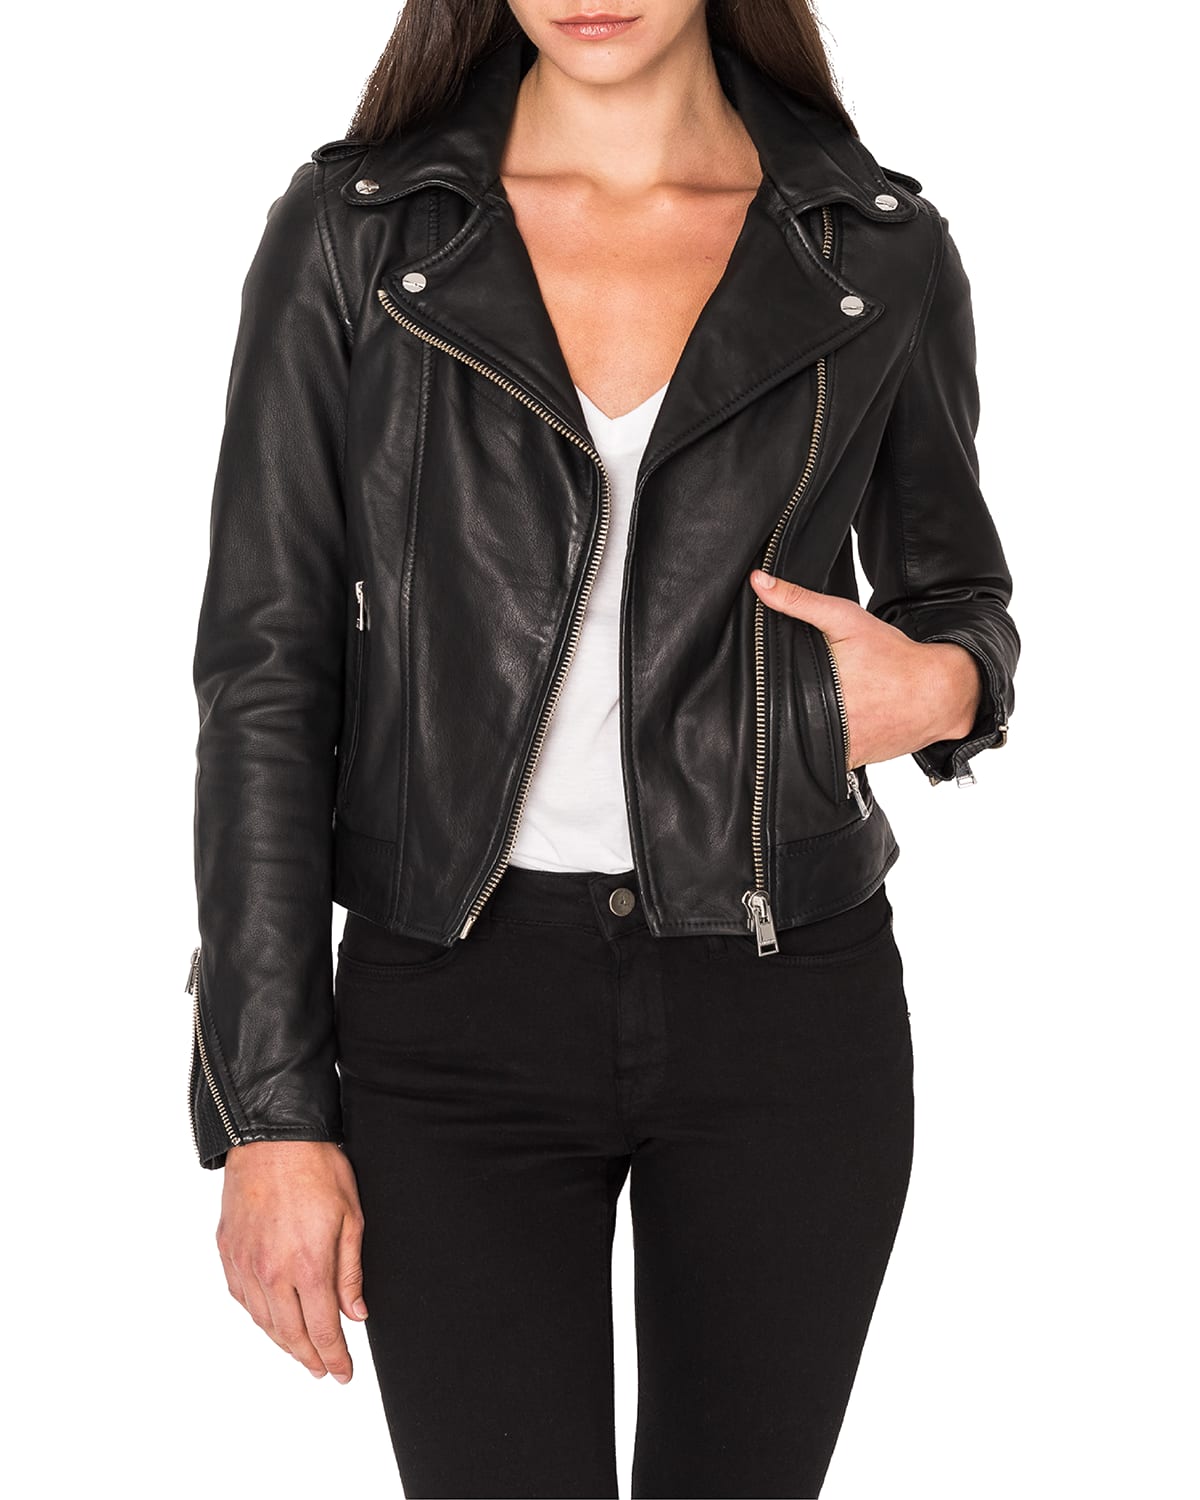 LaMarque Holy Leather Biker Jacket w/ Removable Hood